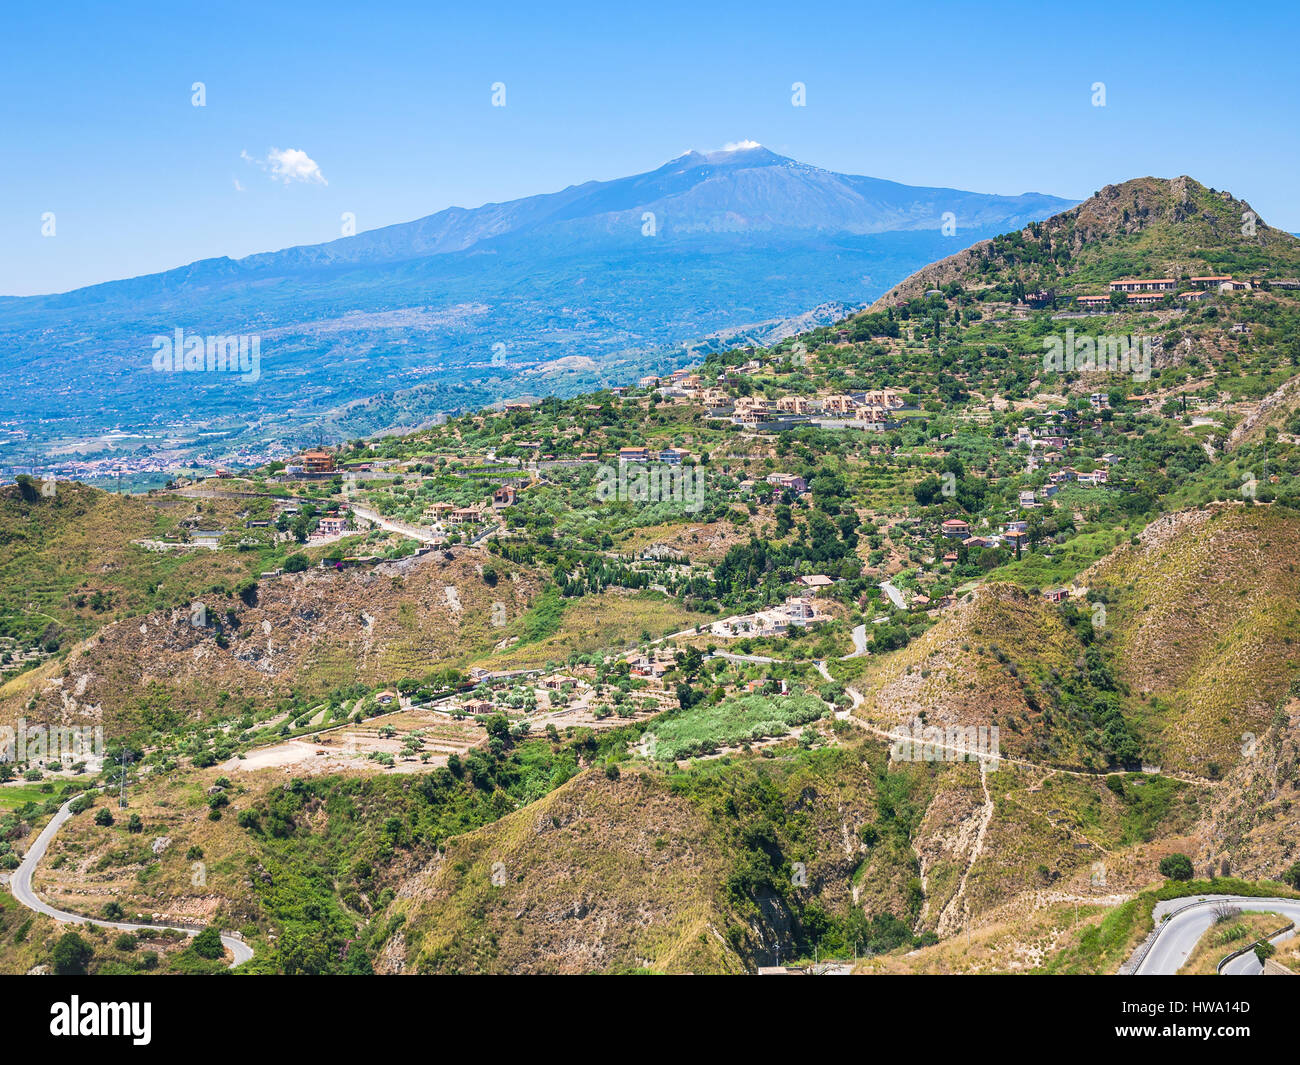 travel to Italy - view of green hills with villages and Etna volcano in Sicily Stock Photo